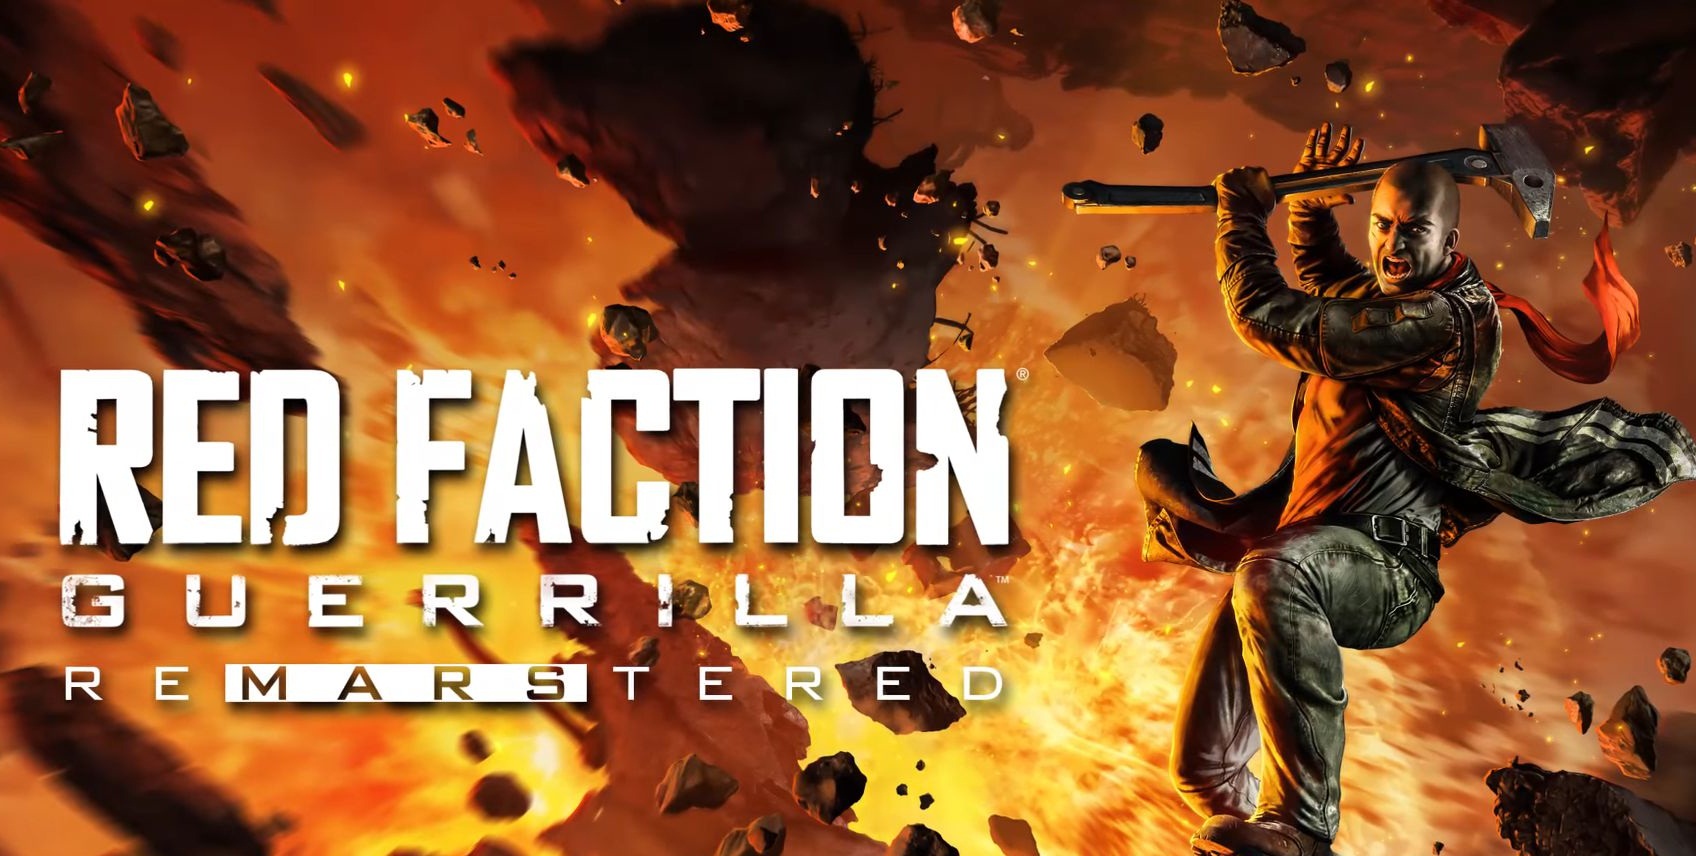 download free red faction path to war